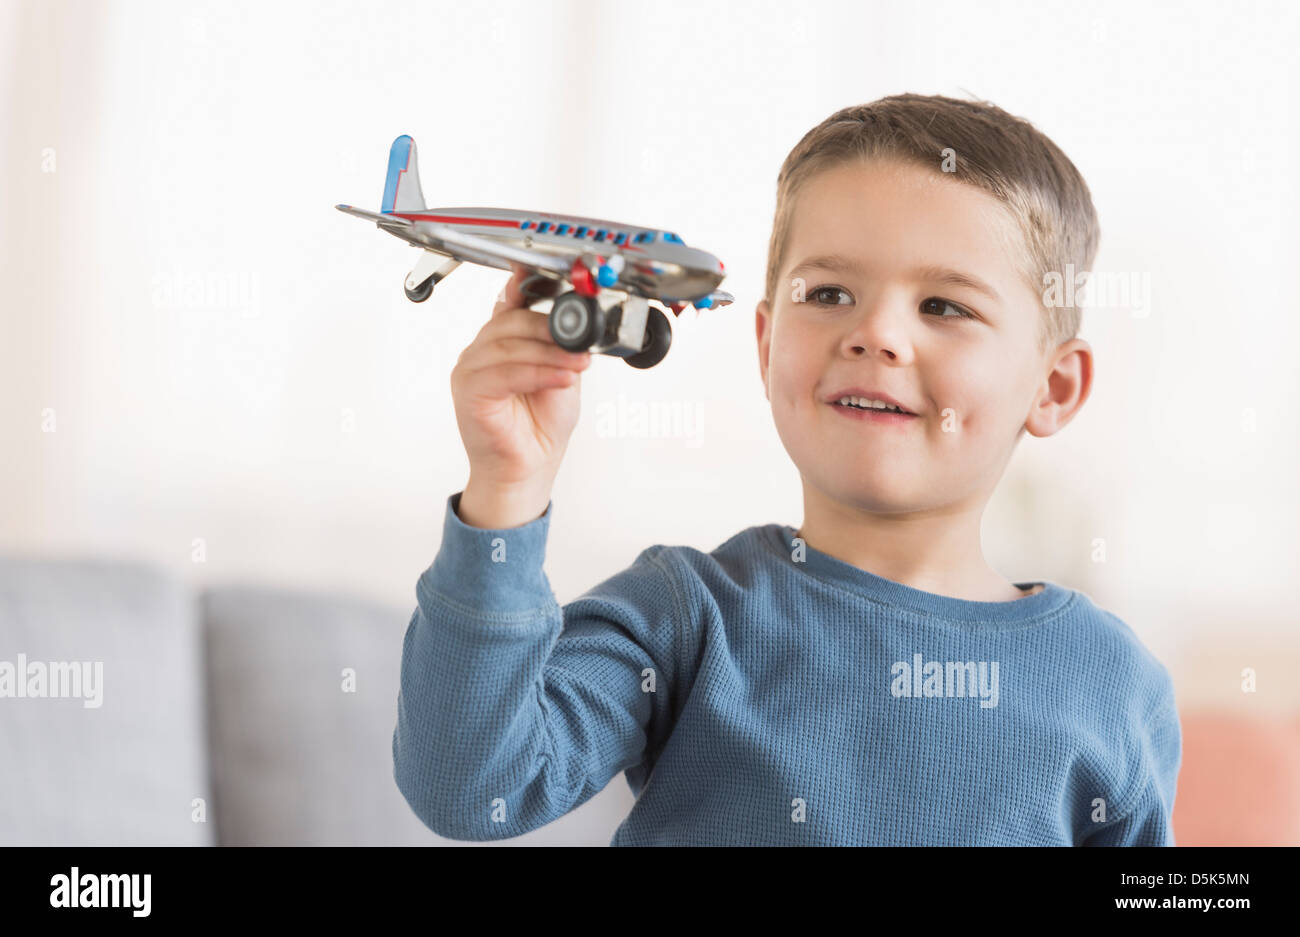 Boy (4-5) playing with toy plane Stock Photo